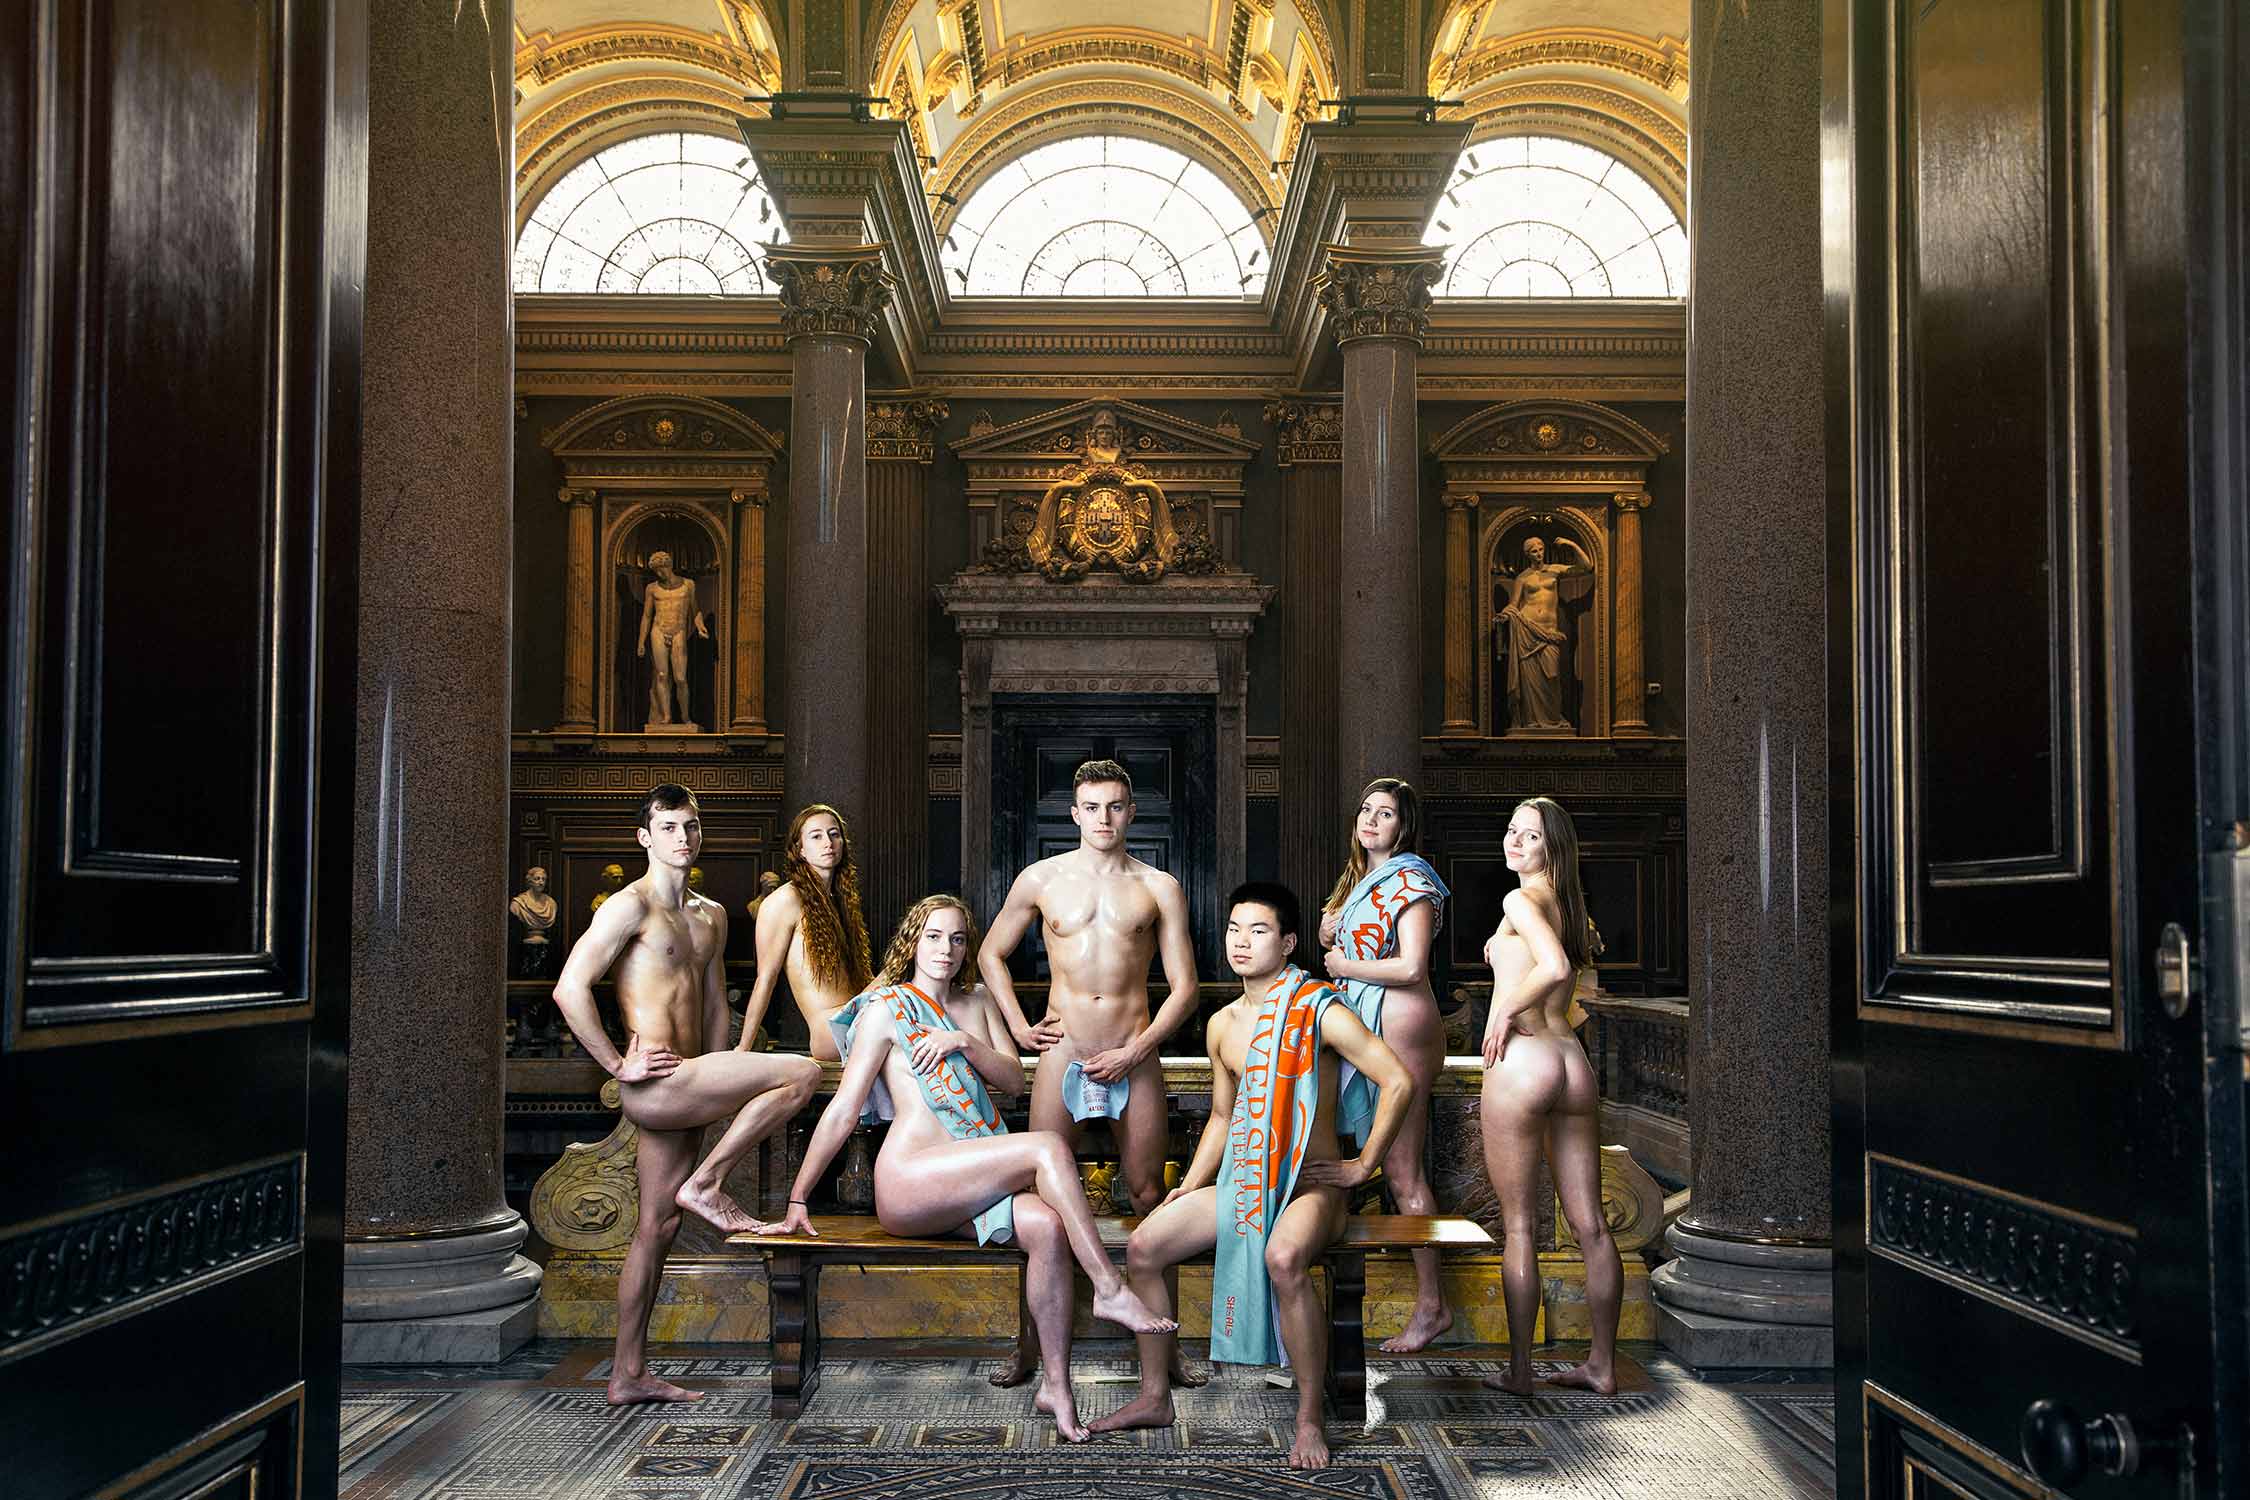 Cover shot for the University of Cambridge RAG Naked Calendar 2021. The swimming team photographed in the Fitzwilliam Museum.